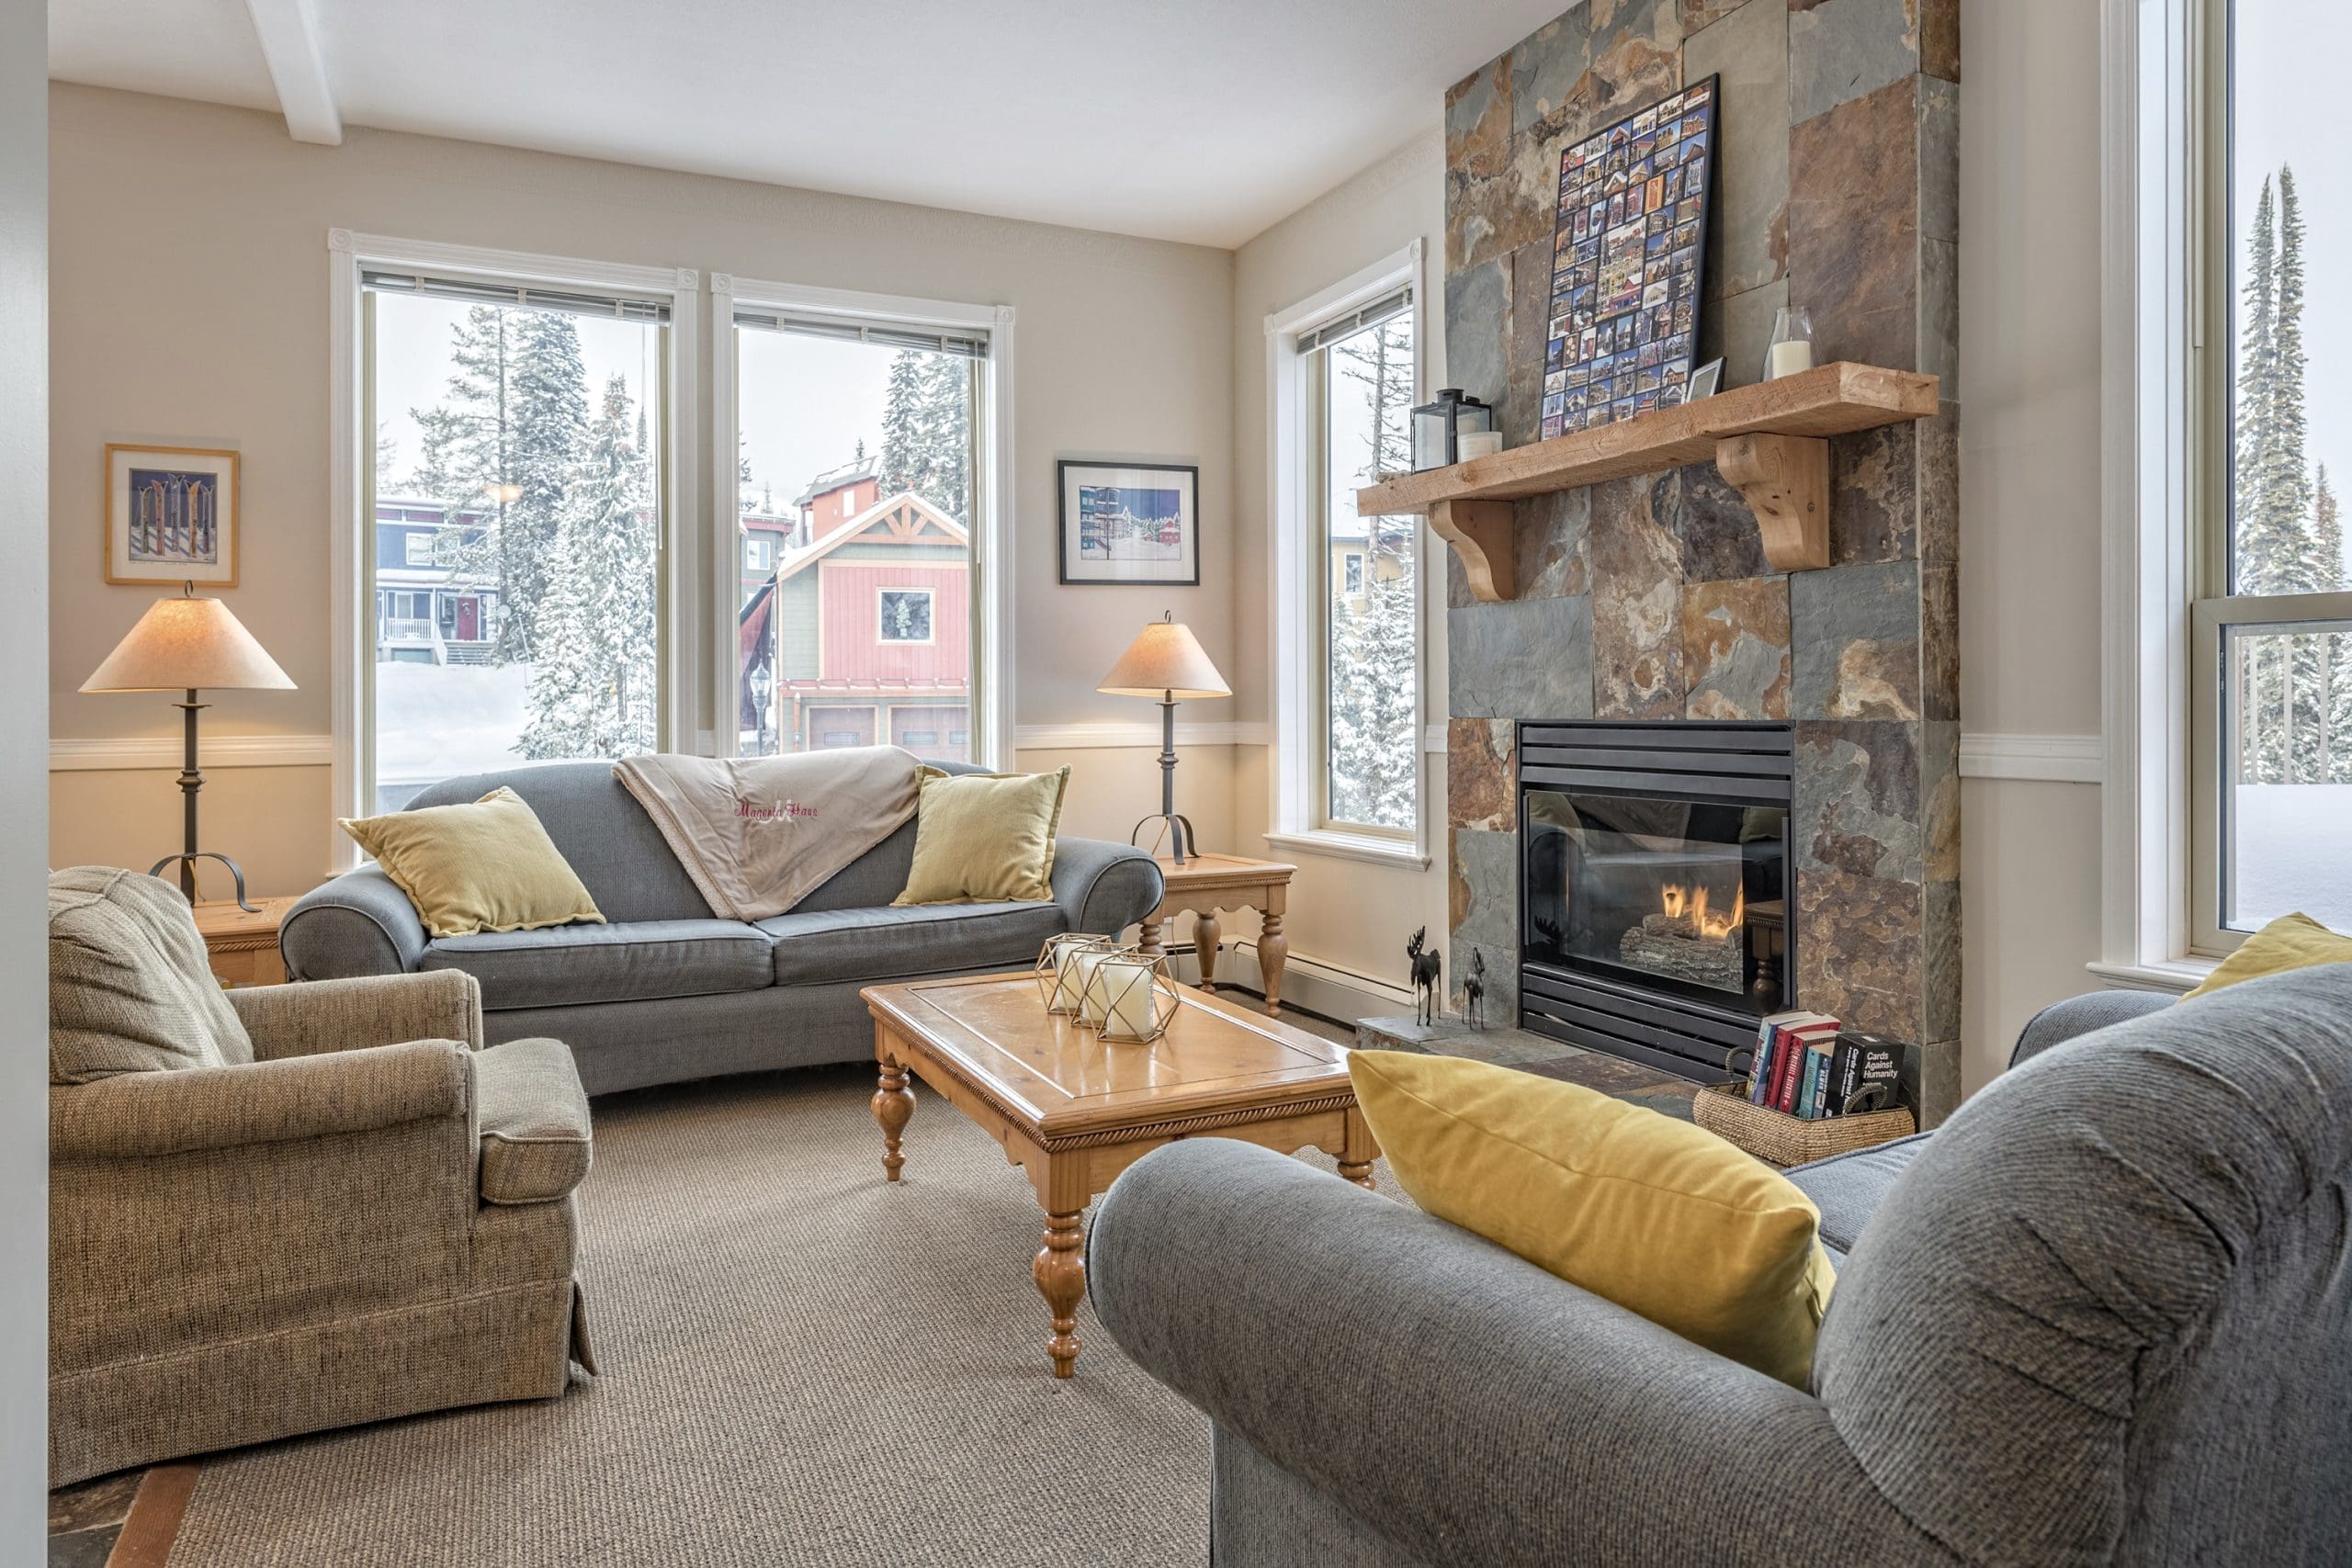 Upper Living Room with bright open windows, gas fireplace, and dining area/table. This home has two private hot tubs, laundry, and great location on the Knoll for a large family or group or friends.